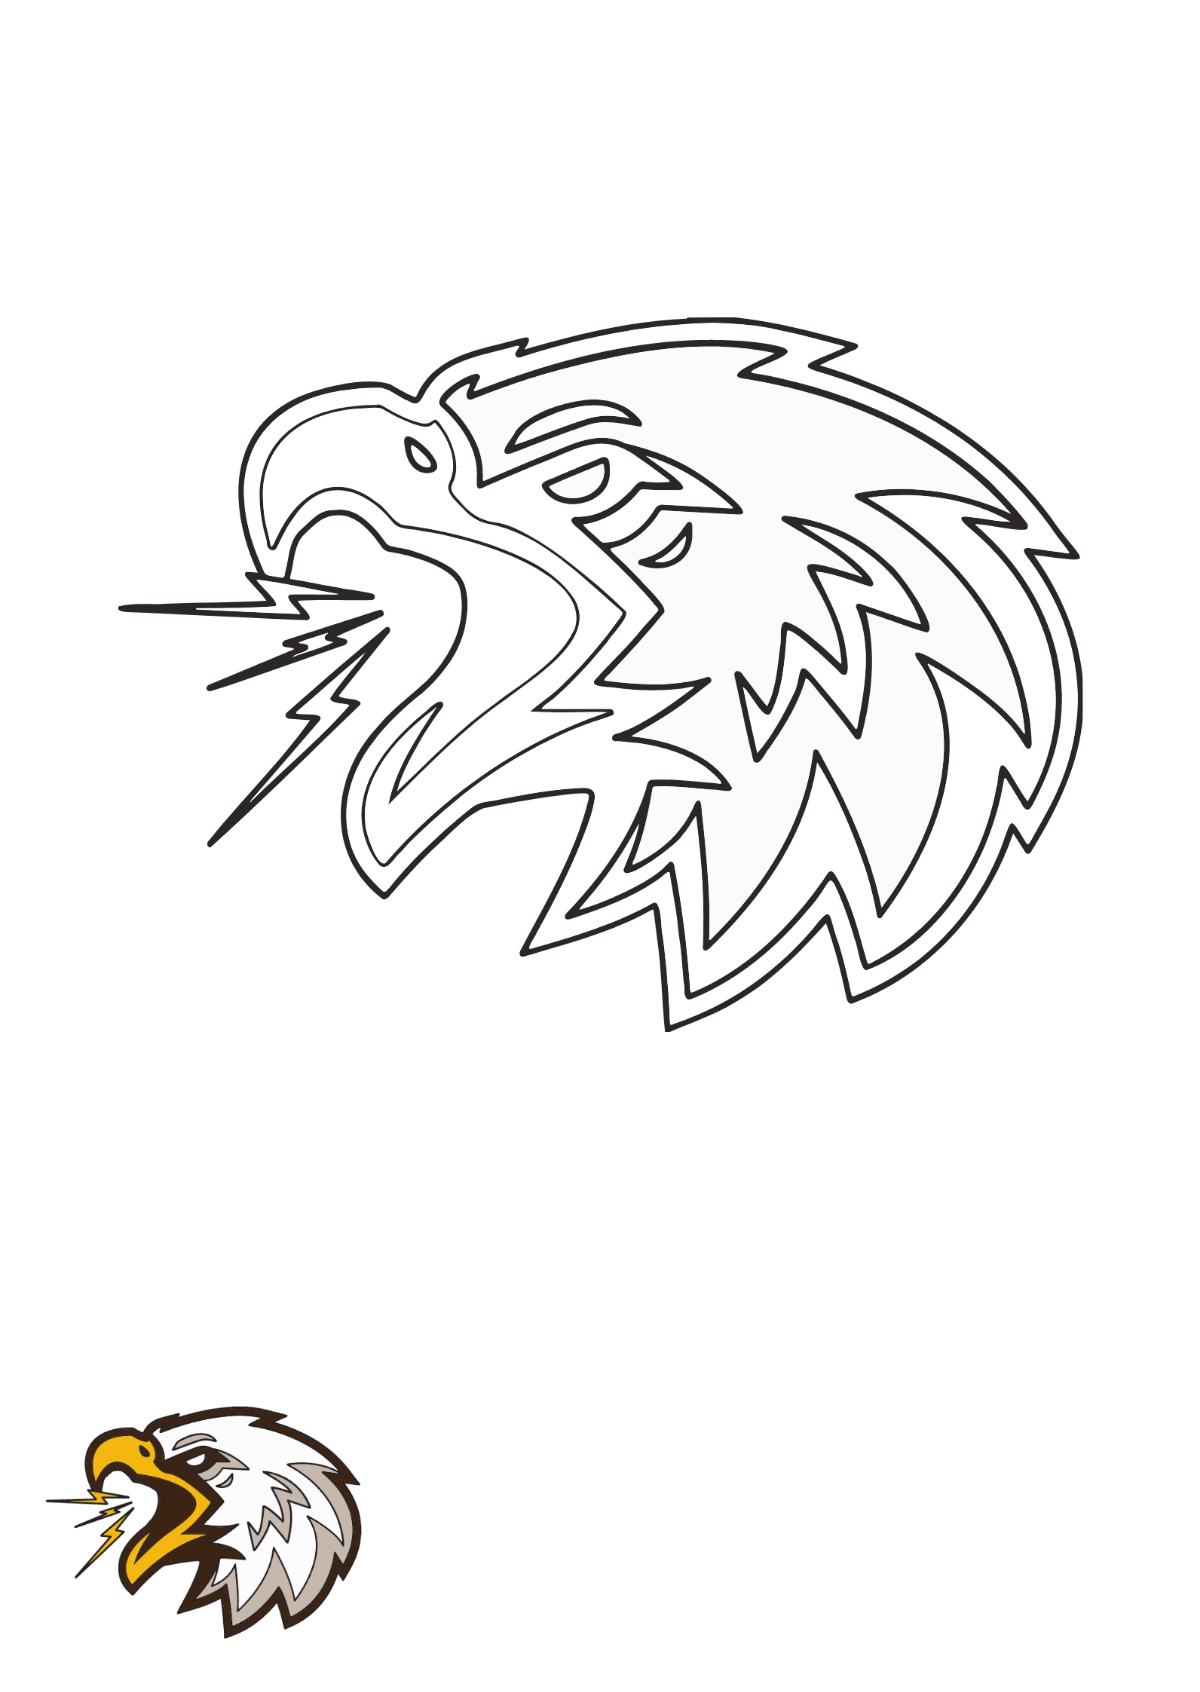 Screaming Eagle coloring page